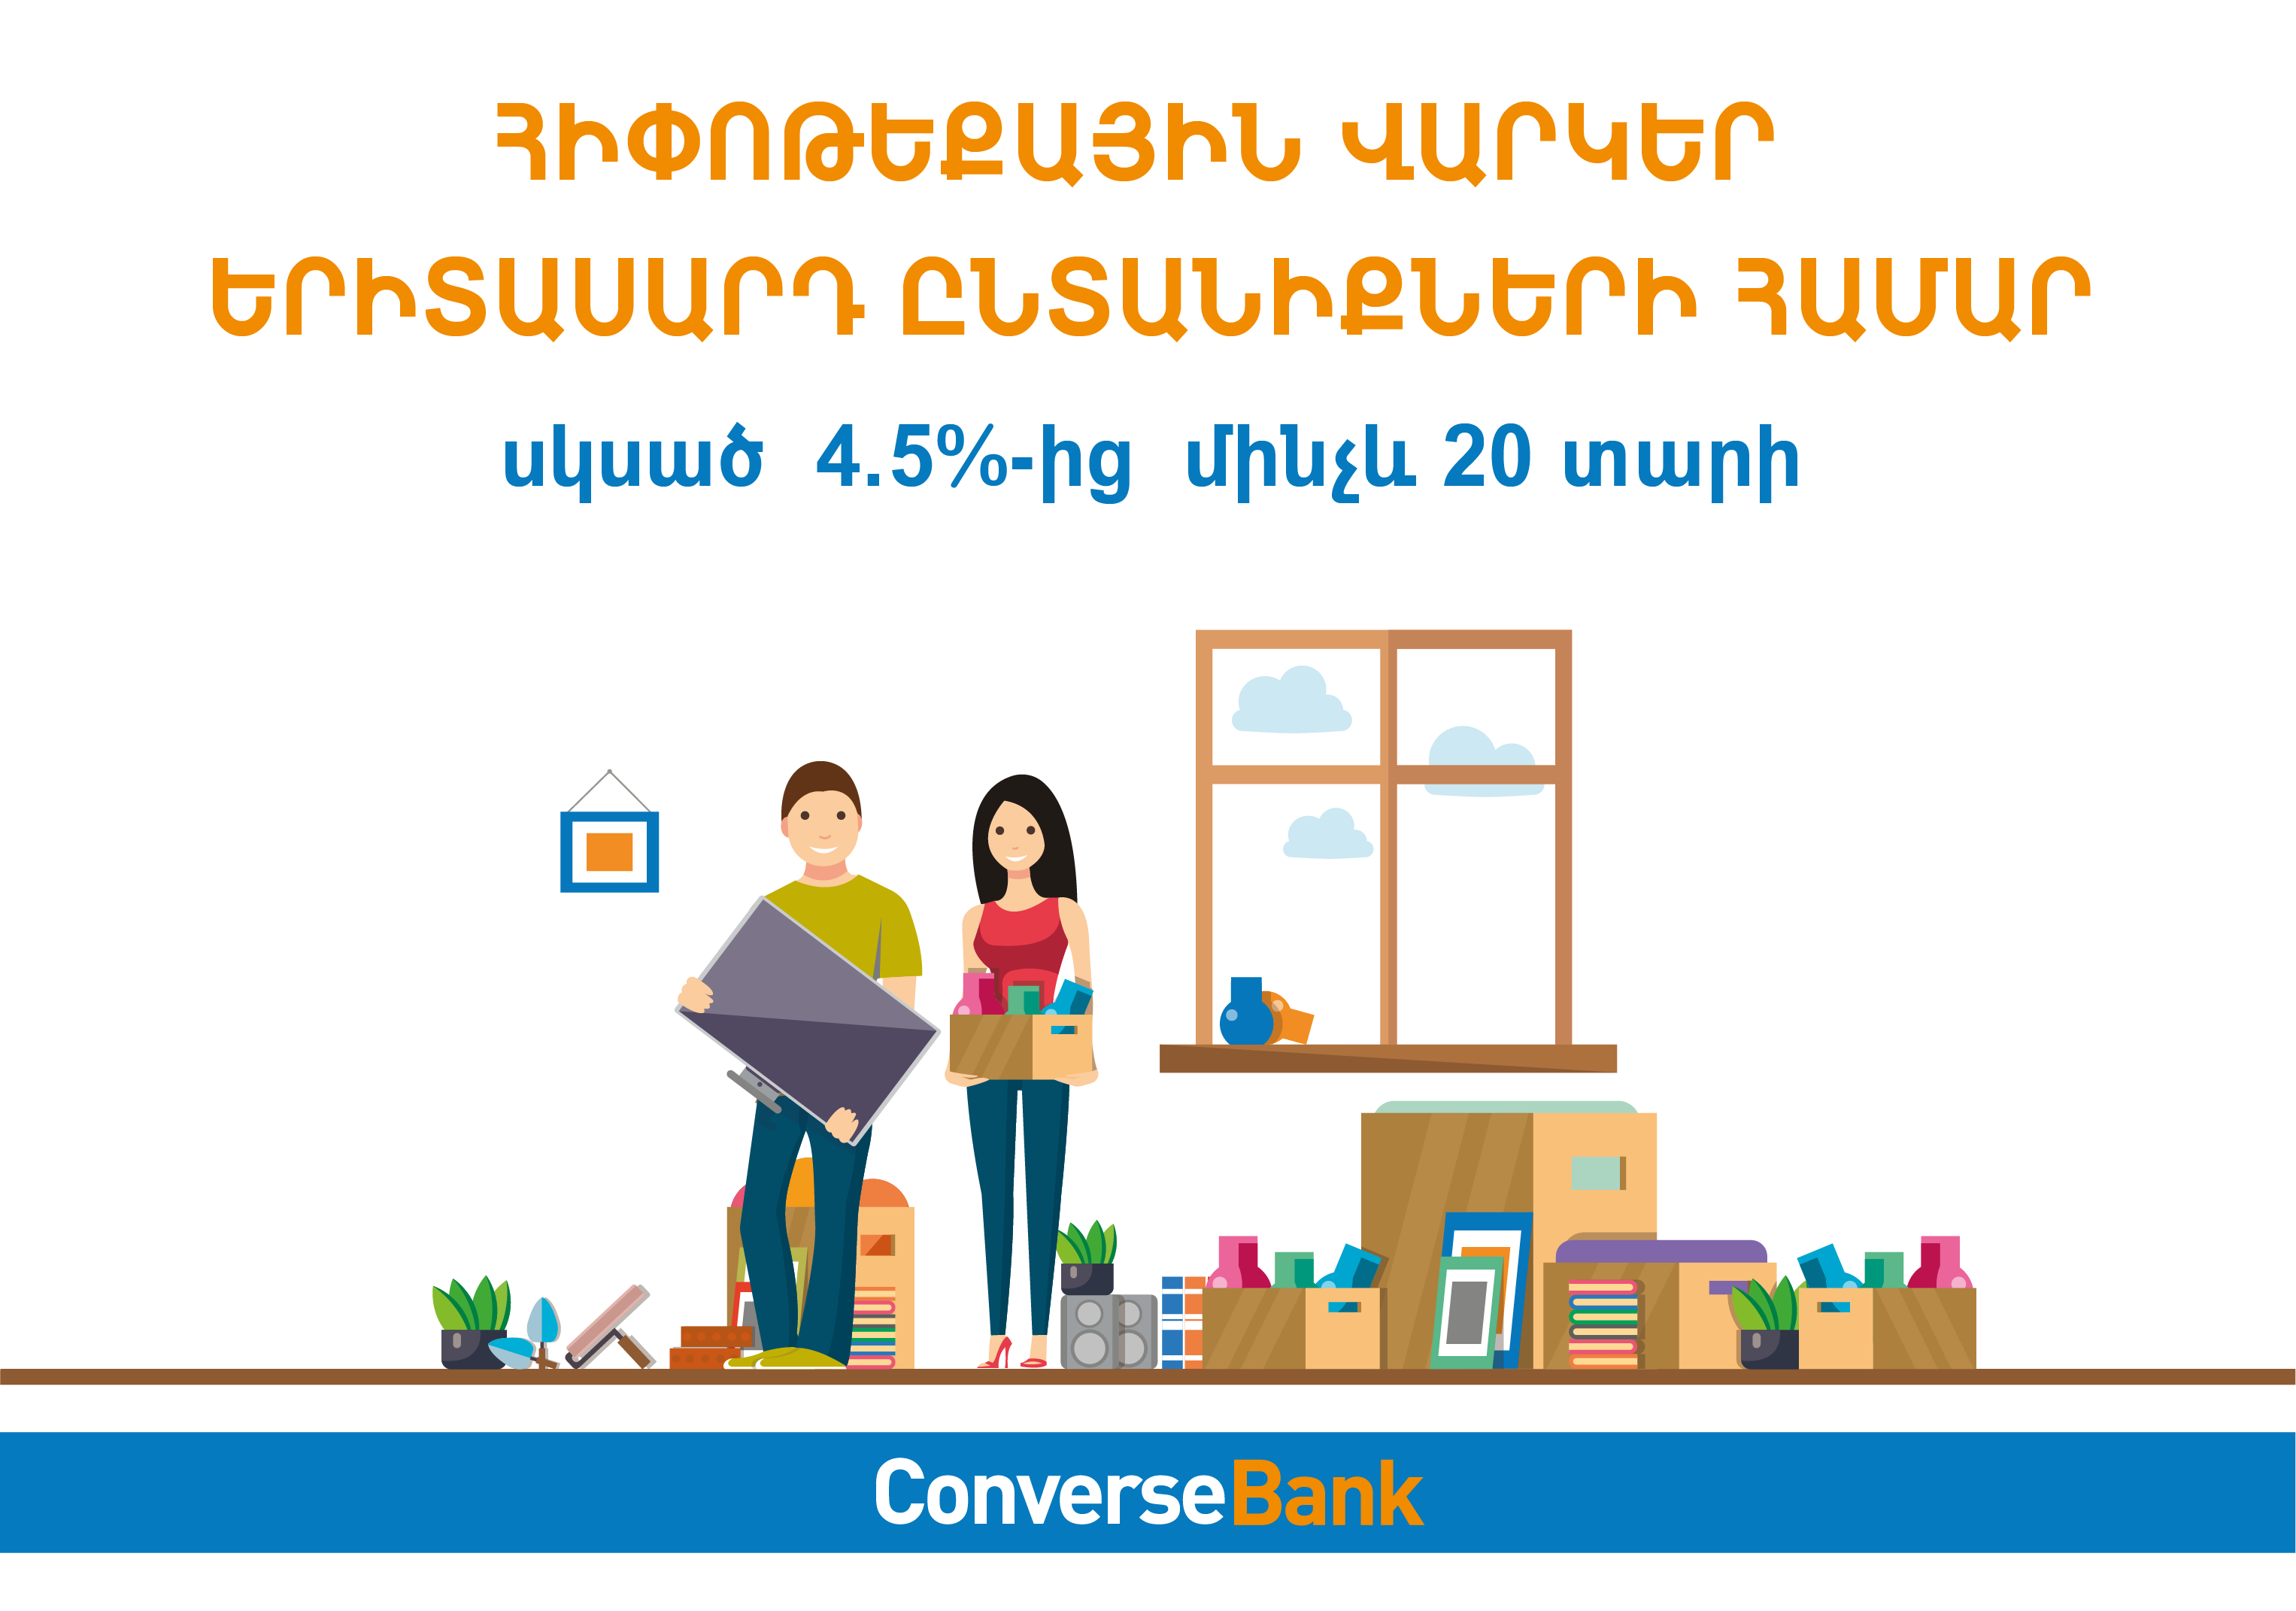 Converse Bank reduced the rate and extended the maturity of mortgage loans